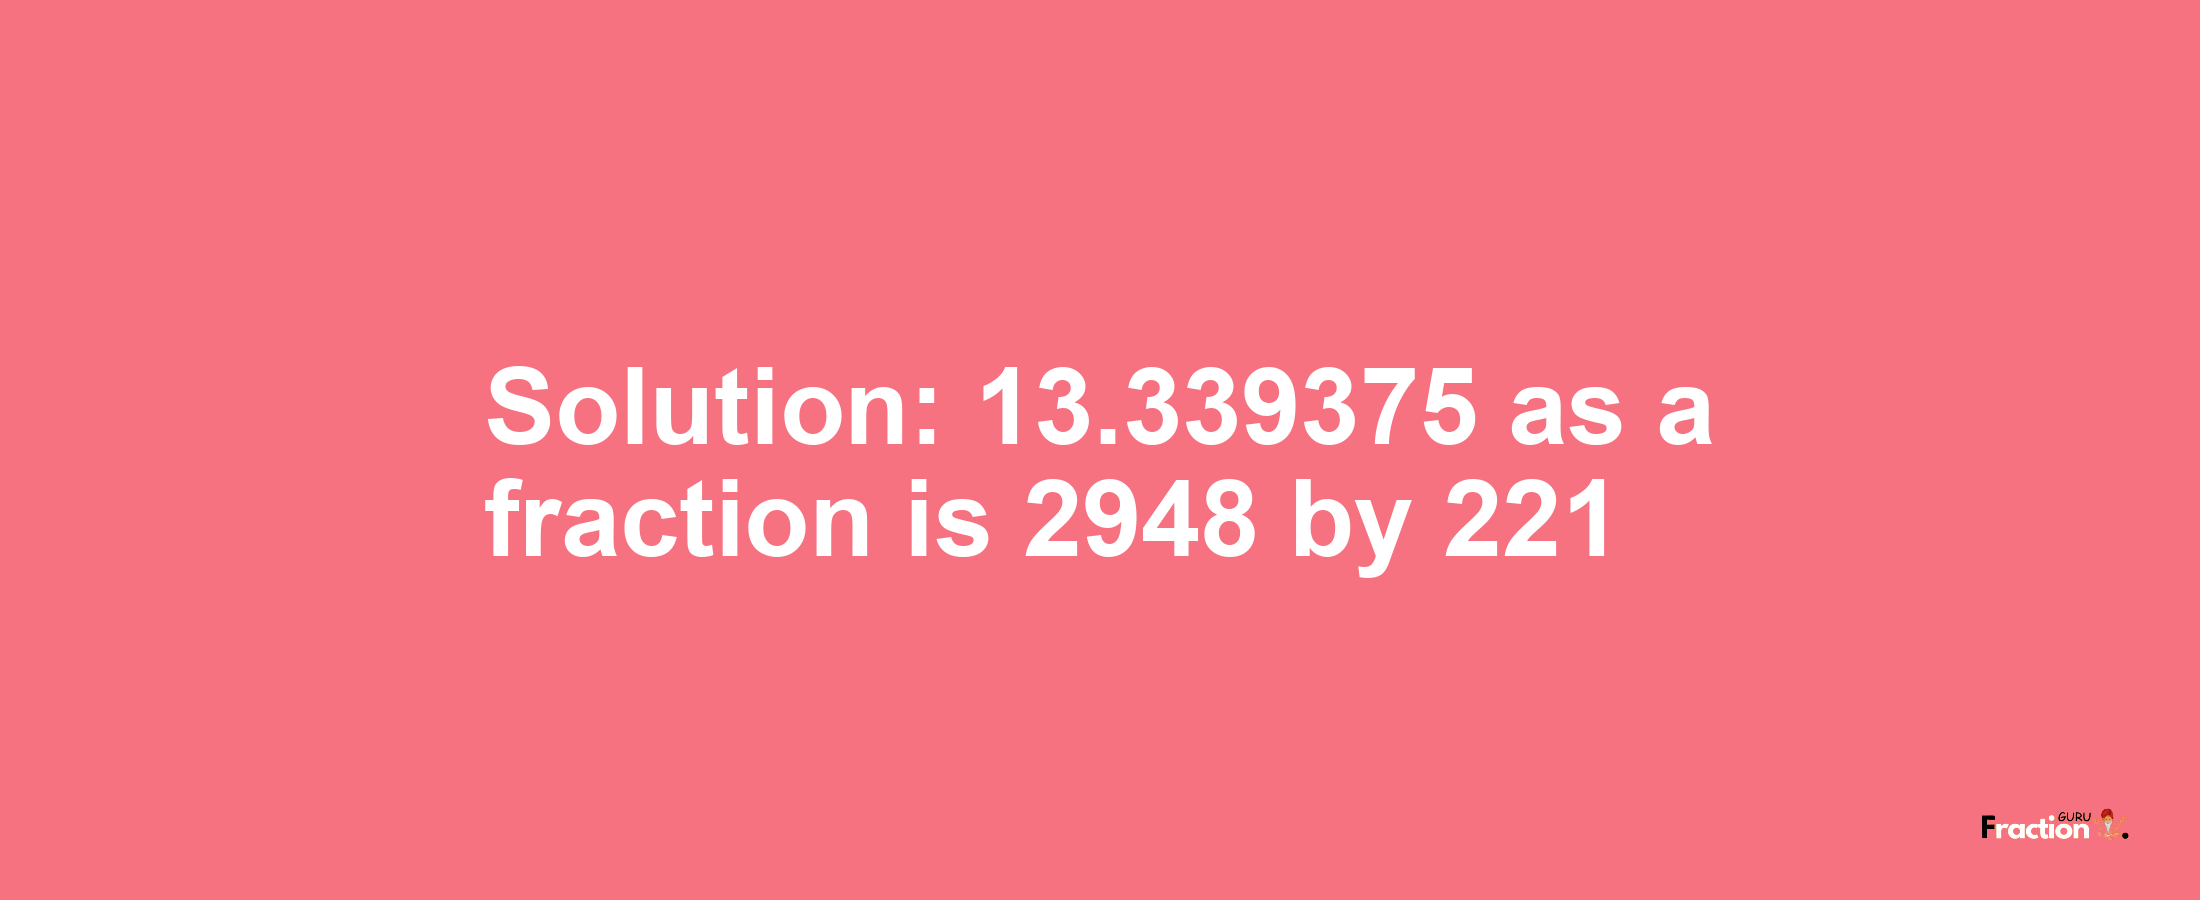 Solution:13.339375 as a fraction is 2948/221